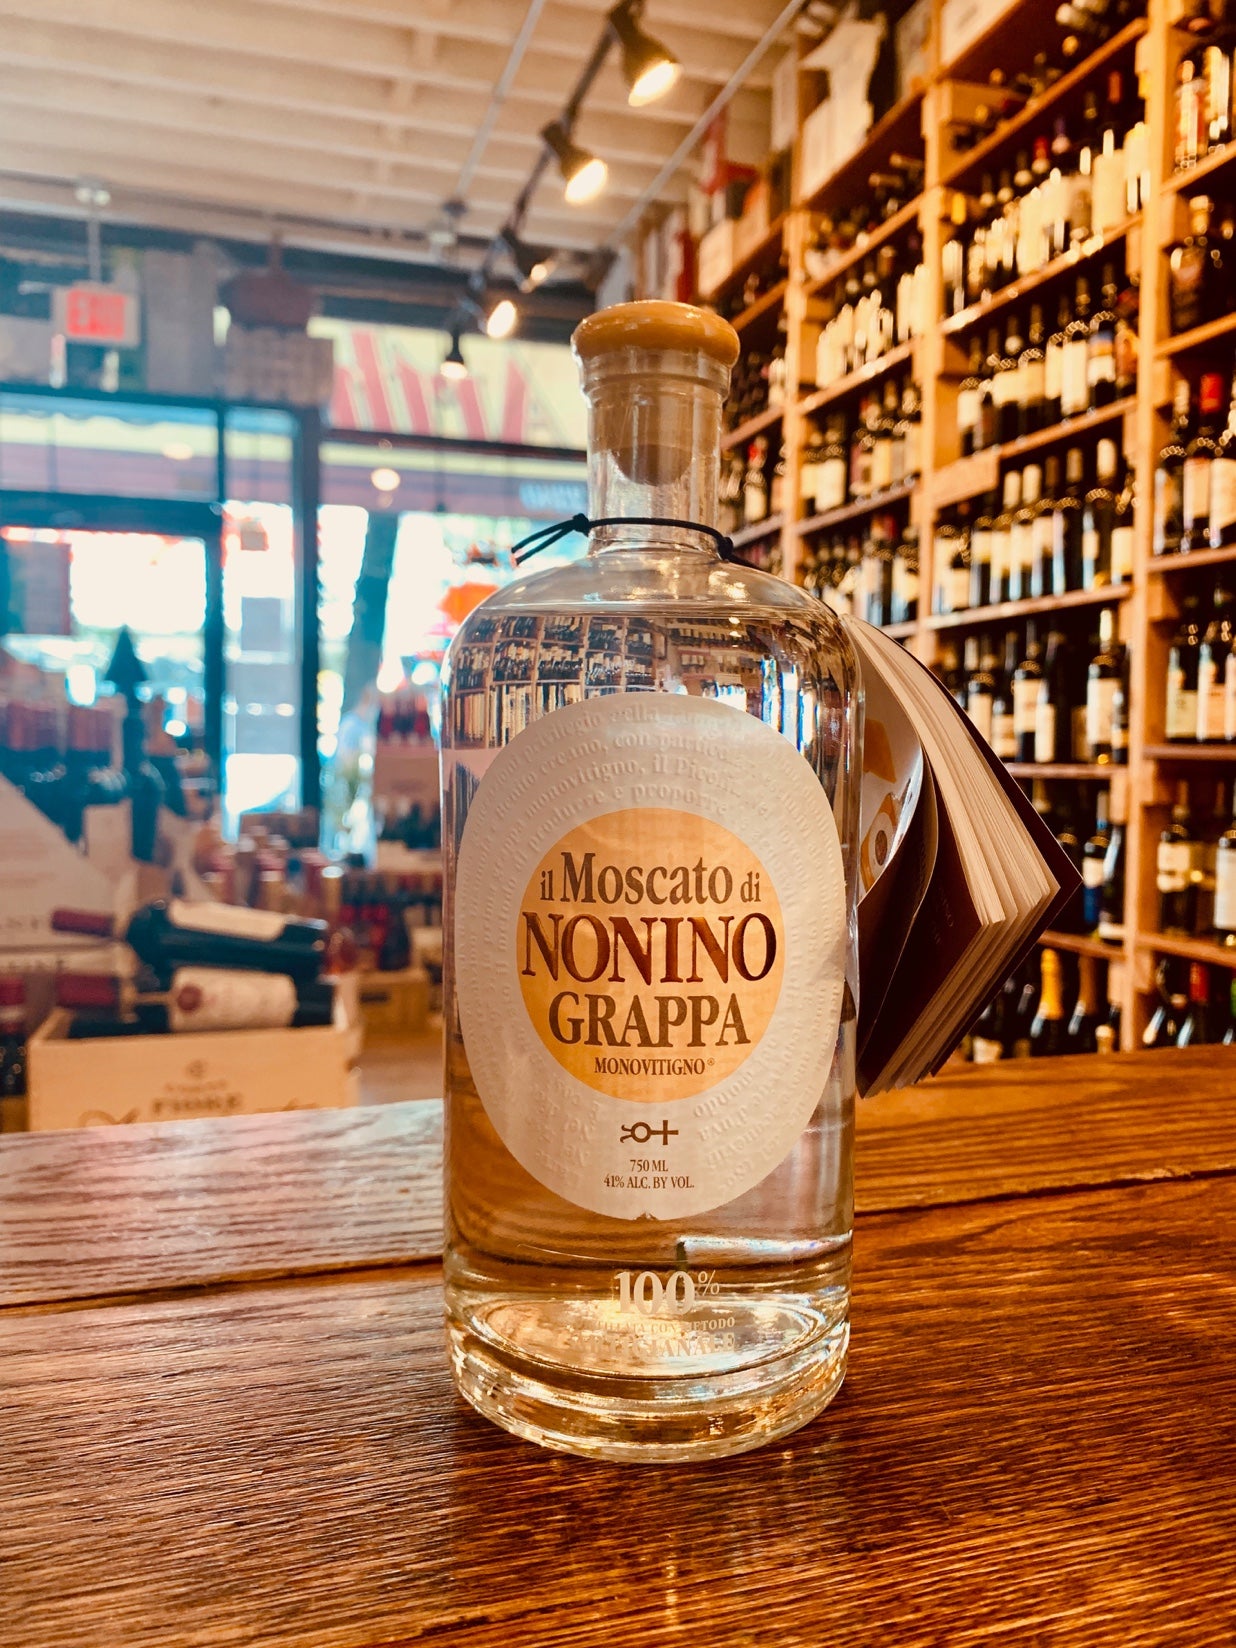 Grappa Nonino Moscato 750mL a short squat round shouldered clear bottle with a stubby neck and white label and wooden top